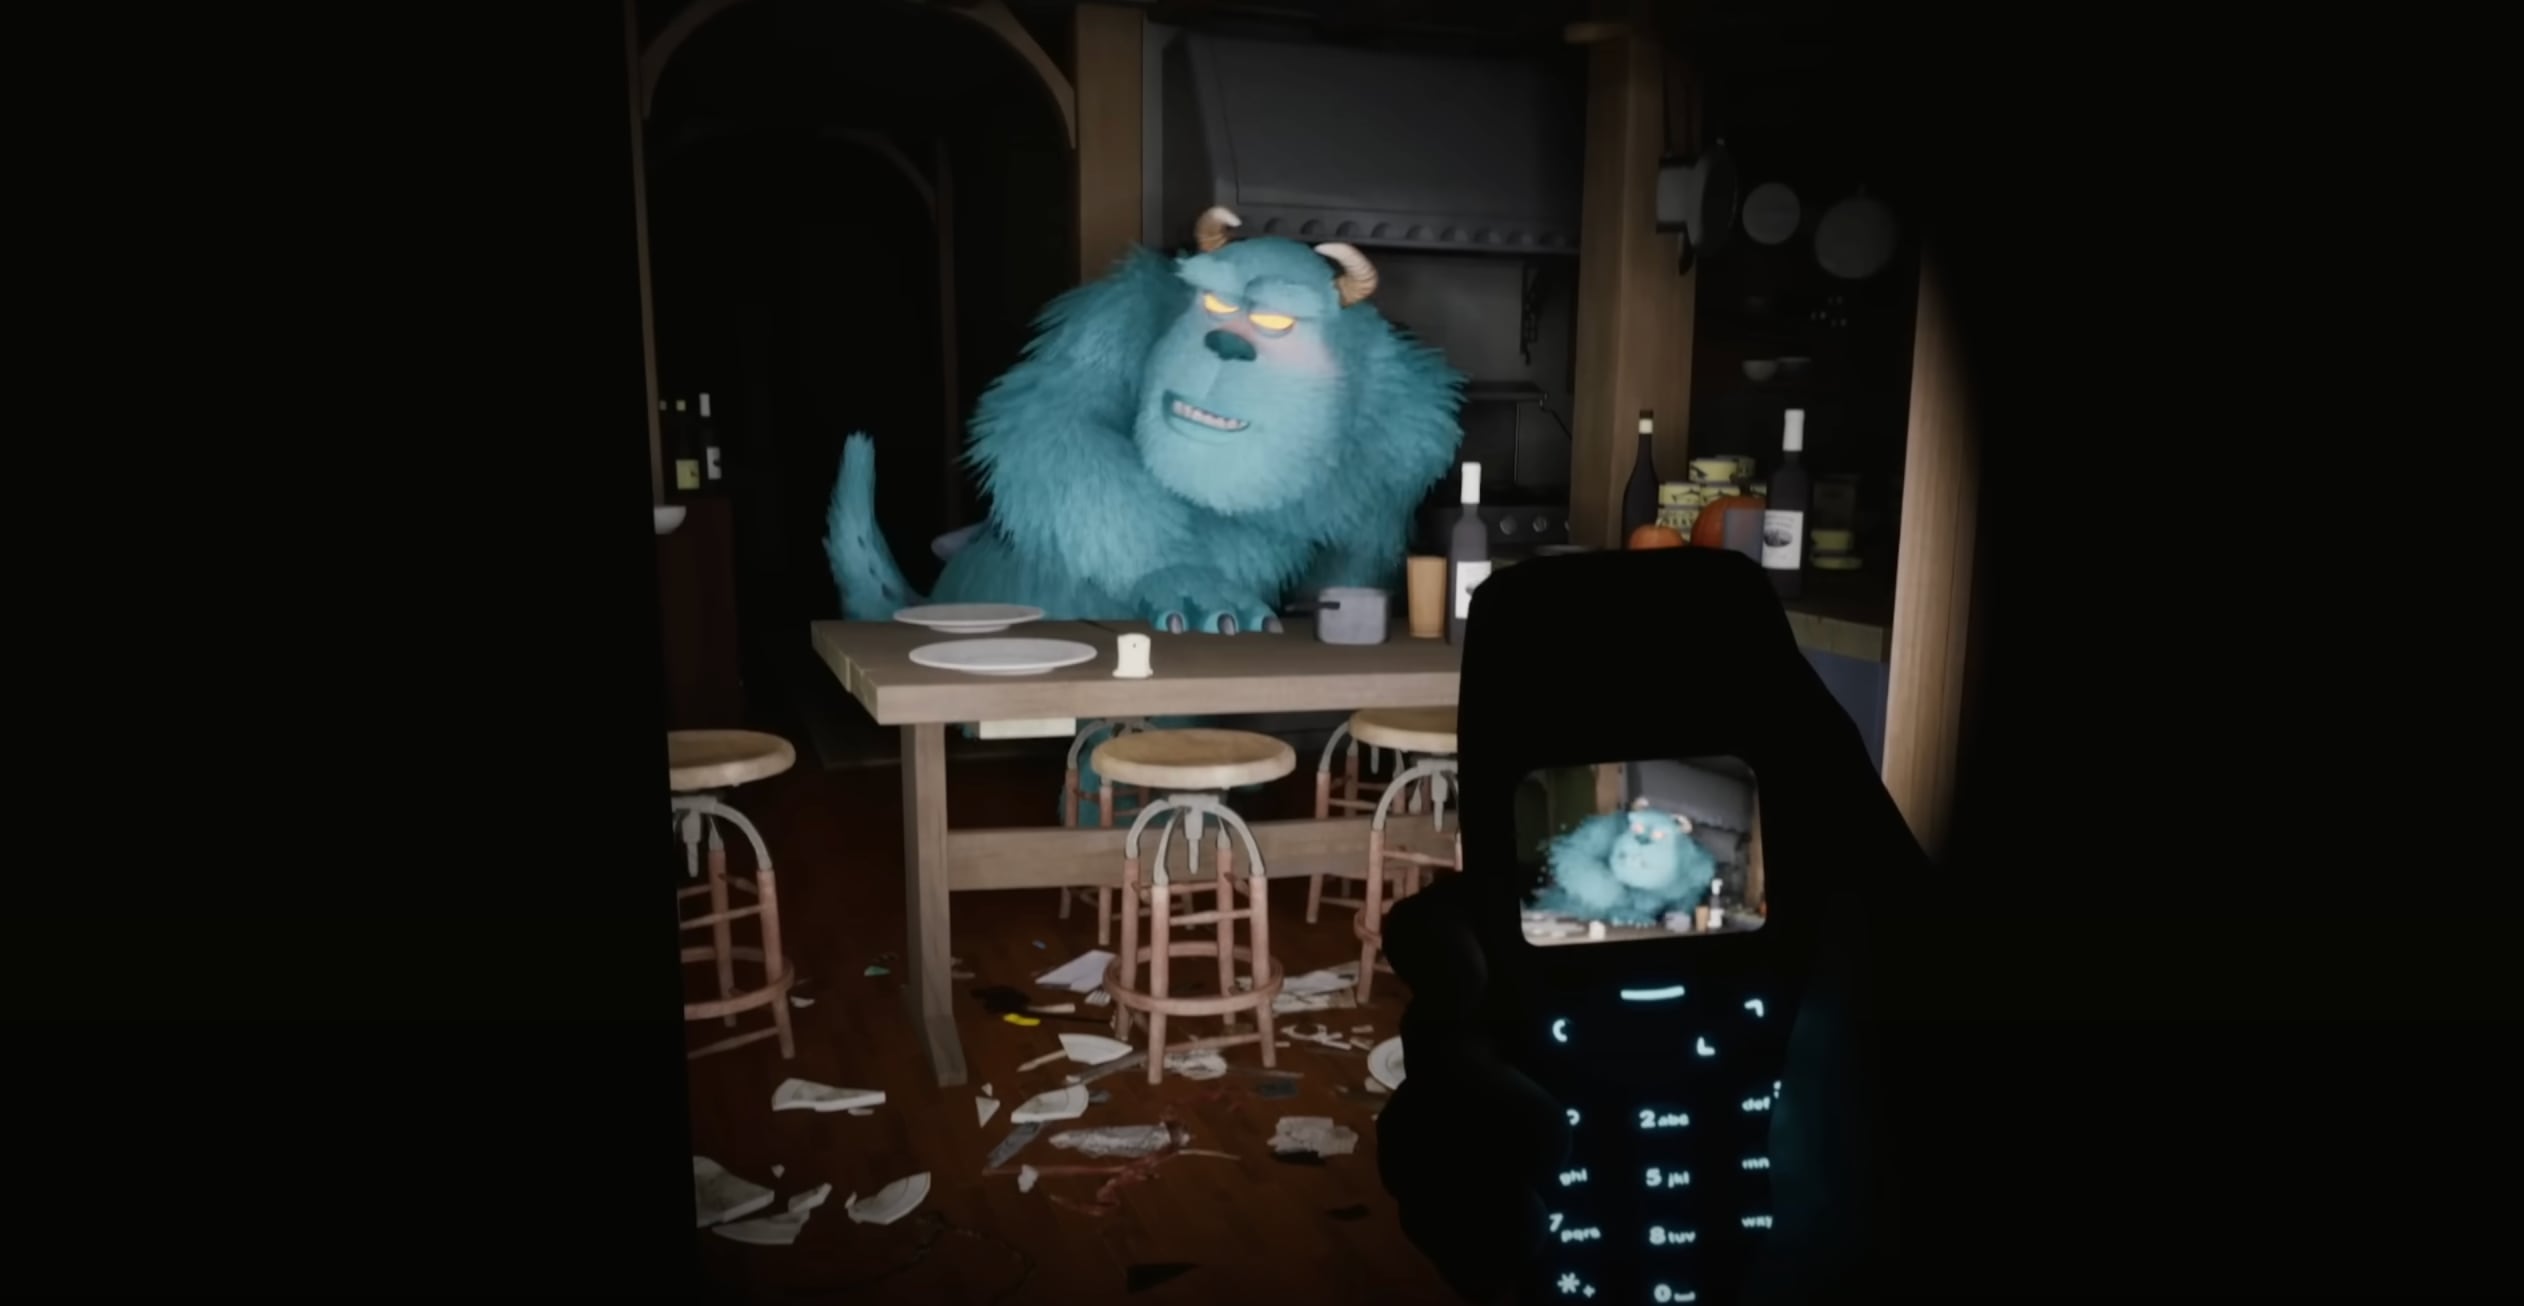 The Other Side of Monsters Inc.